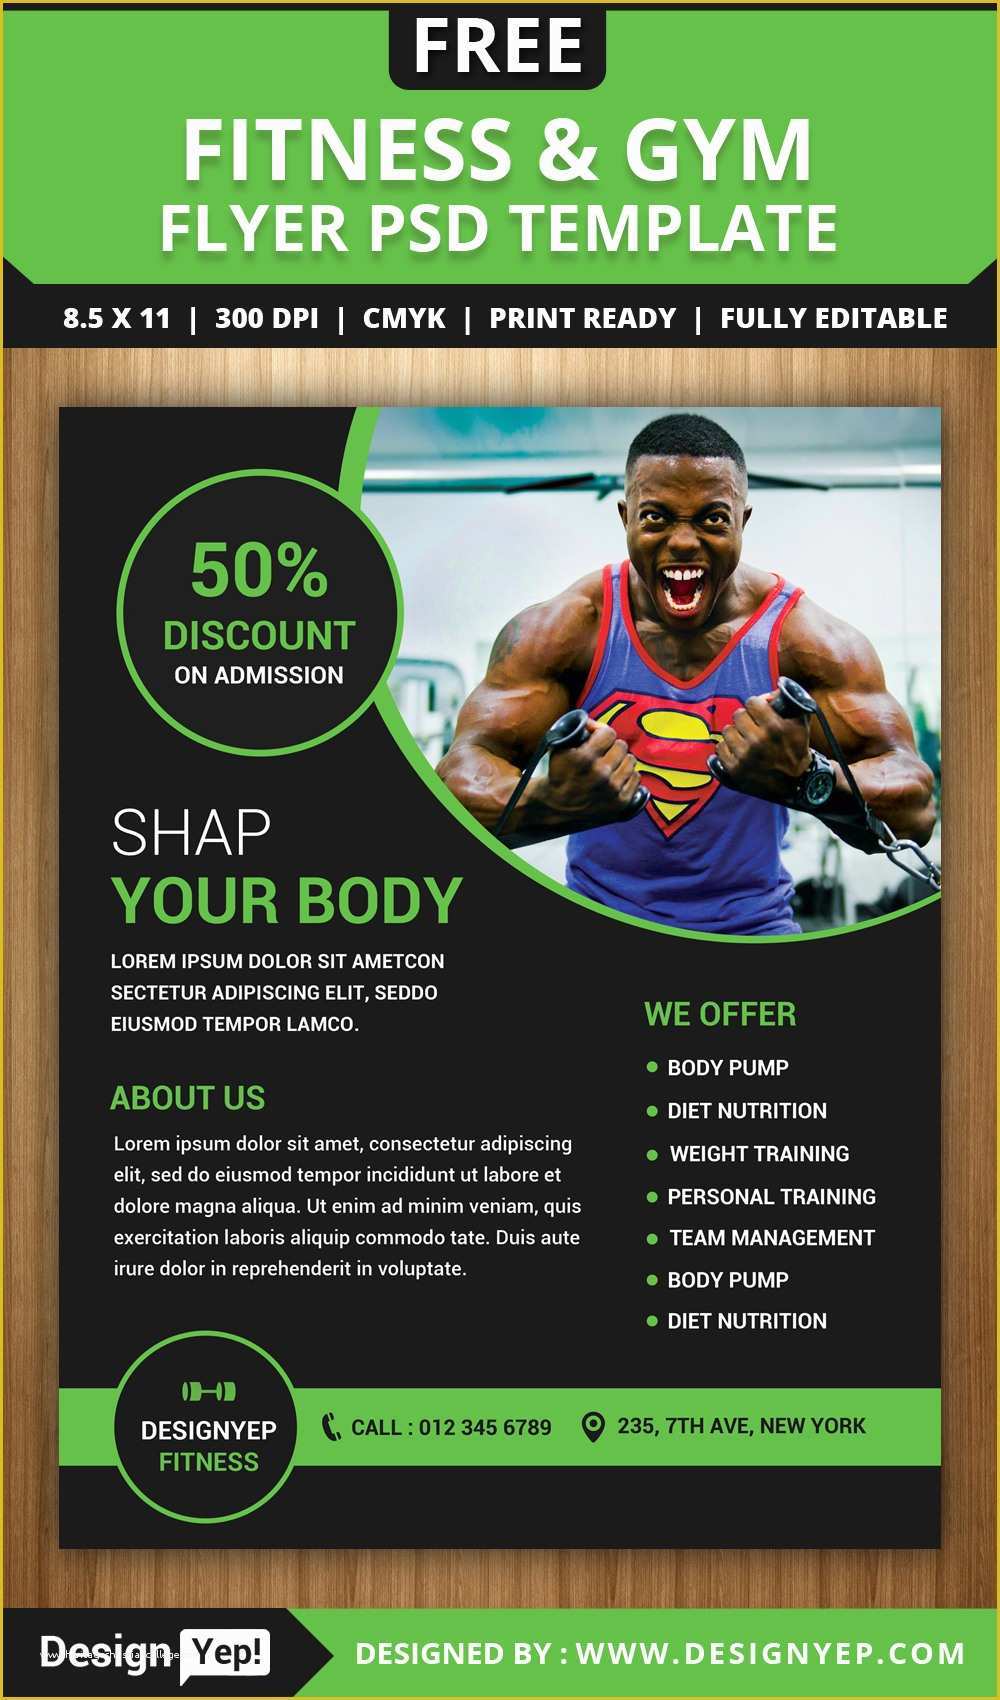 Gym Flyer Template Free Of Free Gym and Fitness Flyer Psd Template Designyep